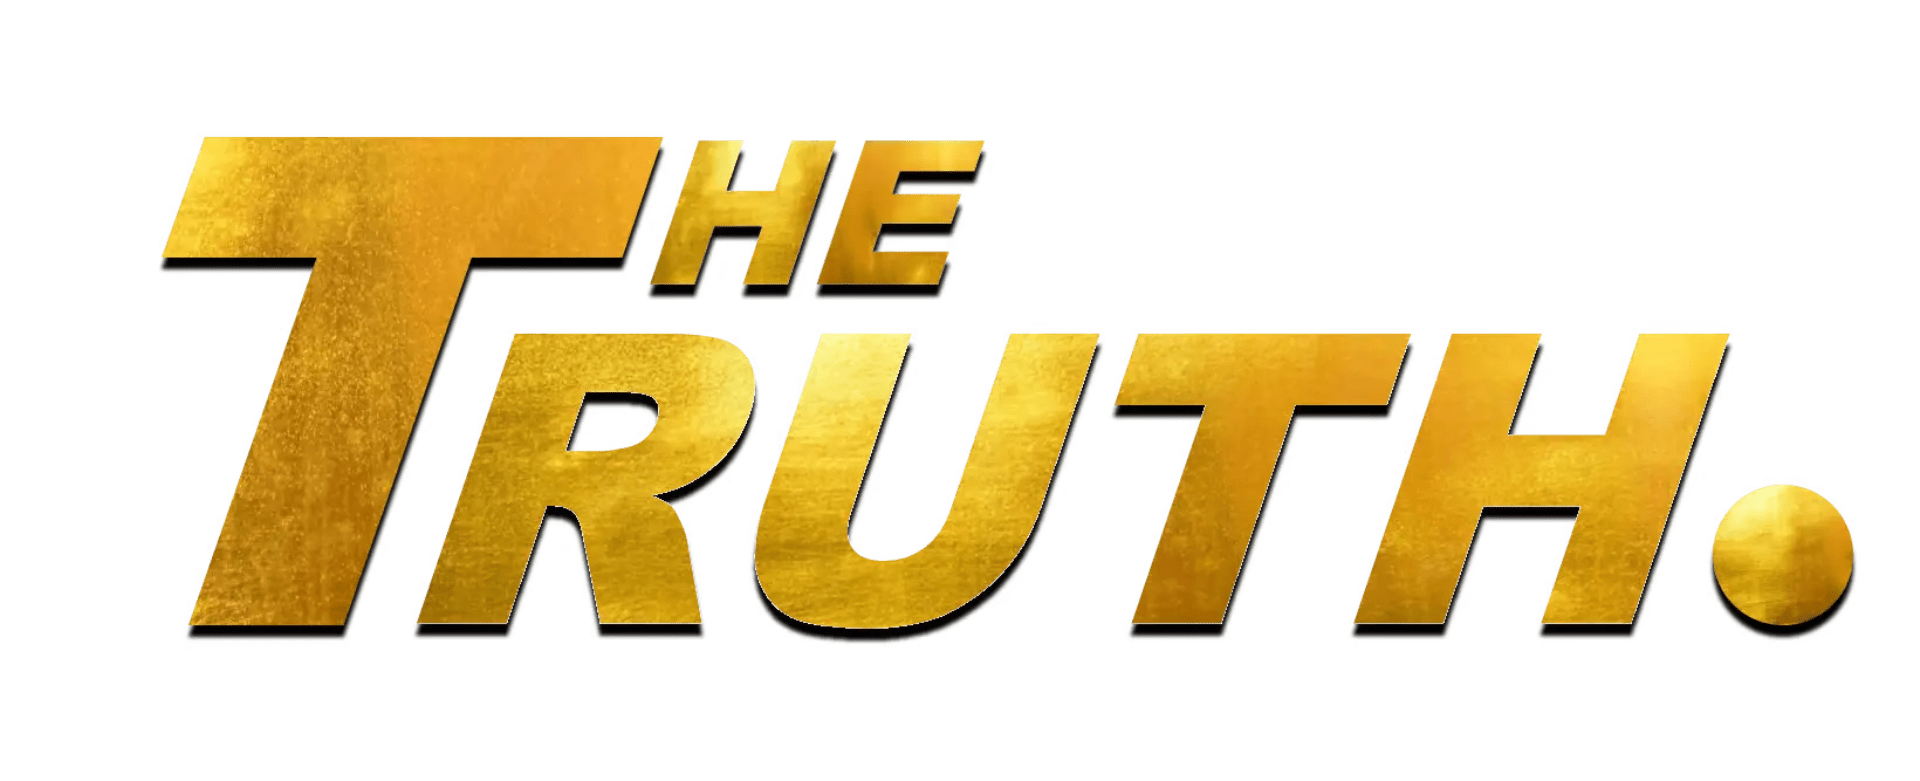 The Truth Program By Tayvon Carr - Free Download Course